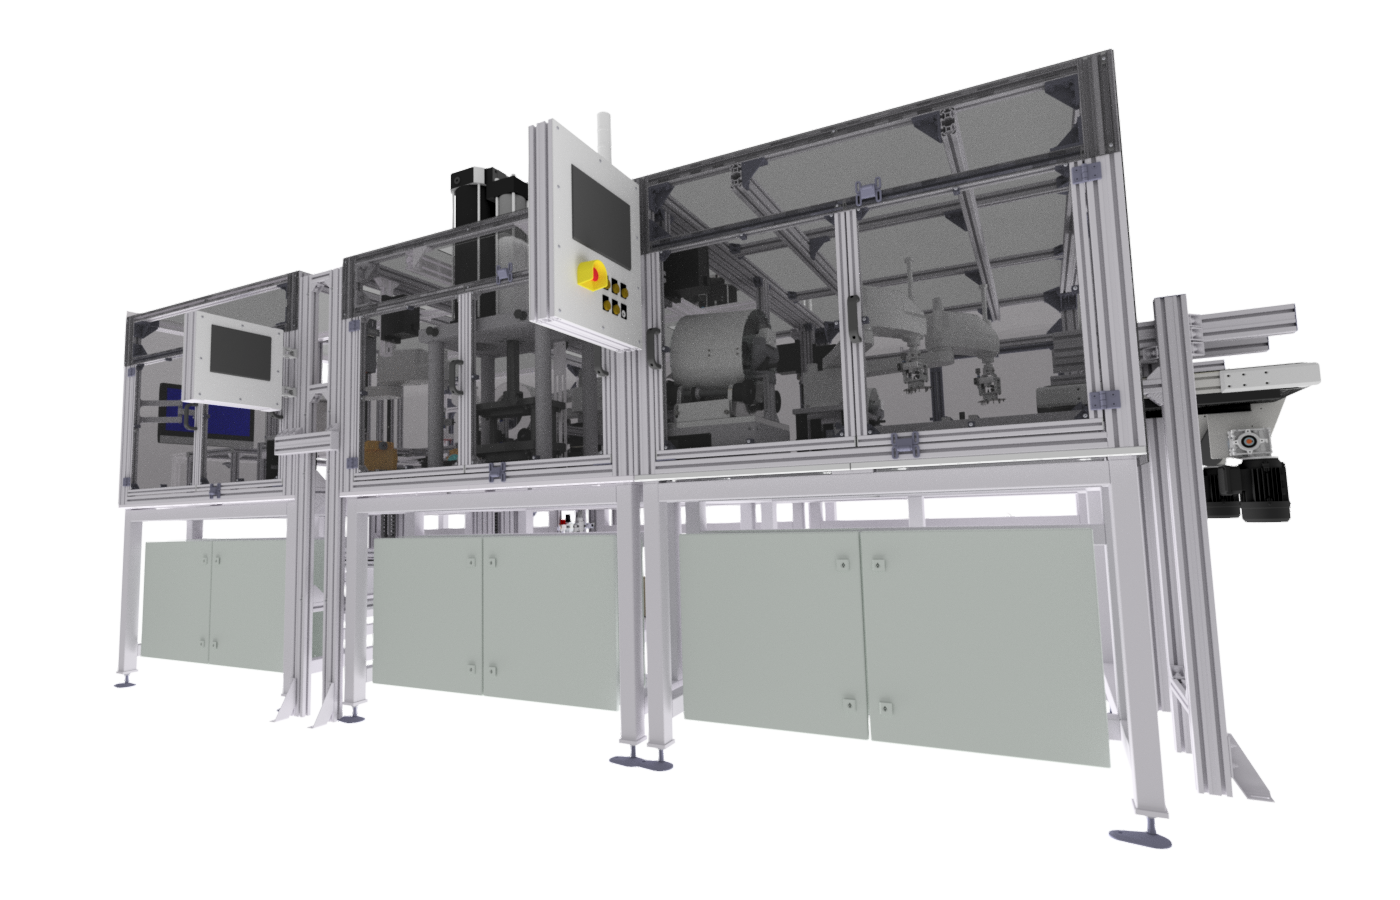 Pressing and packaging robotized workplaces